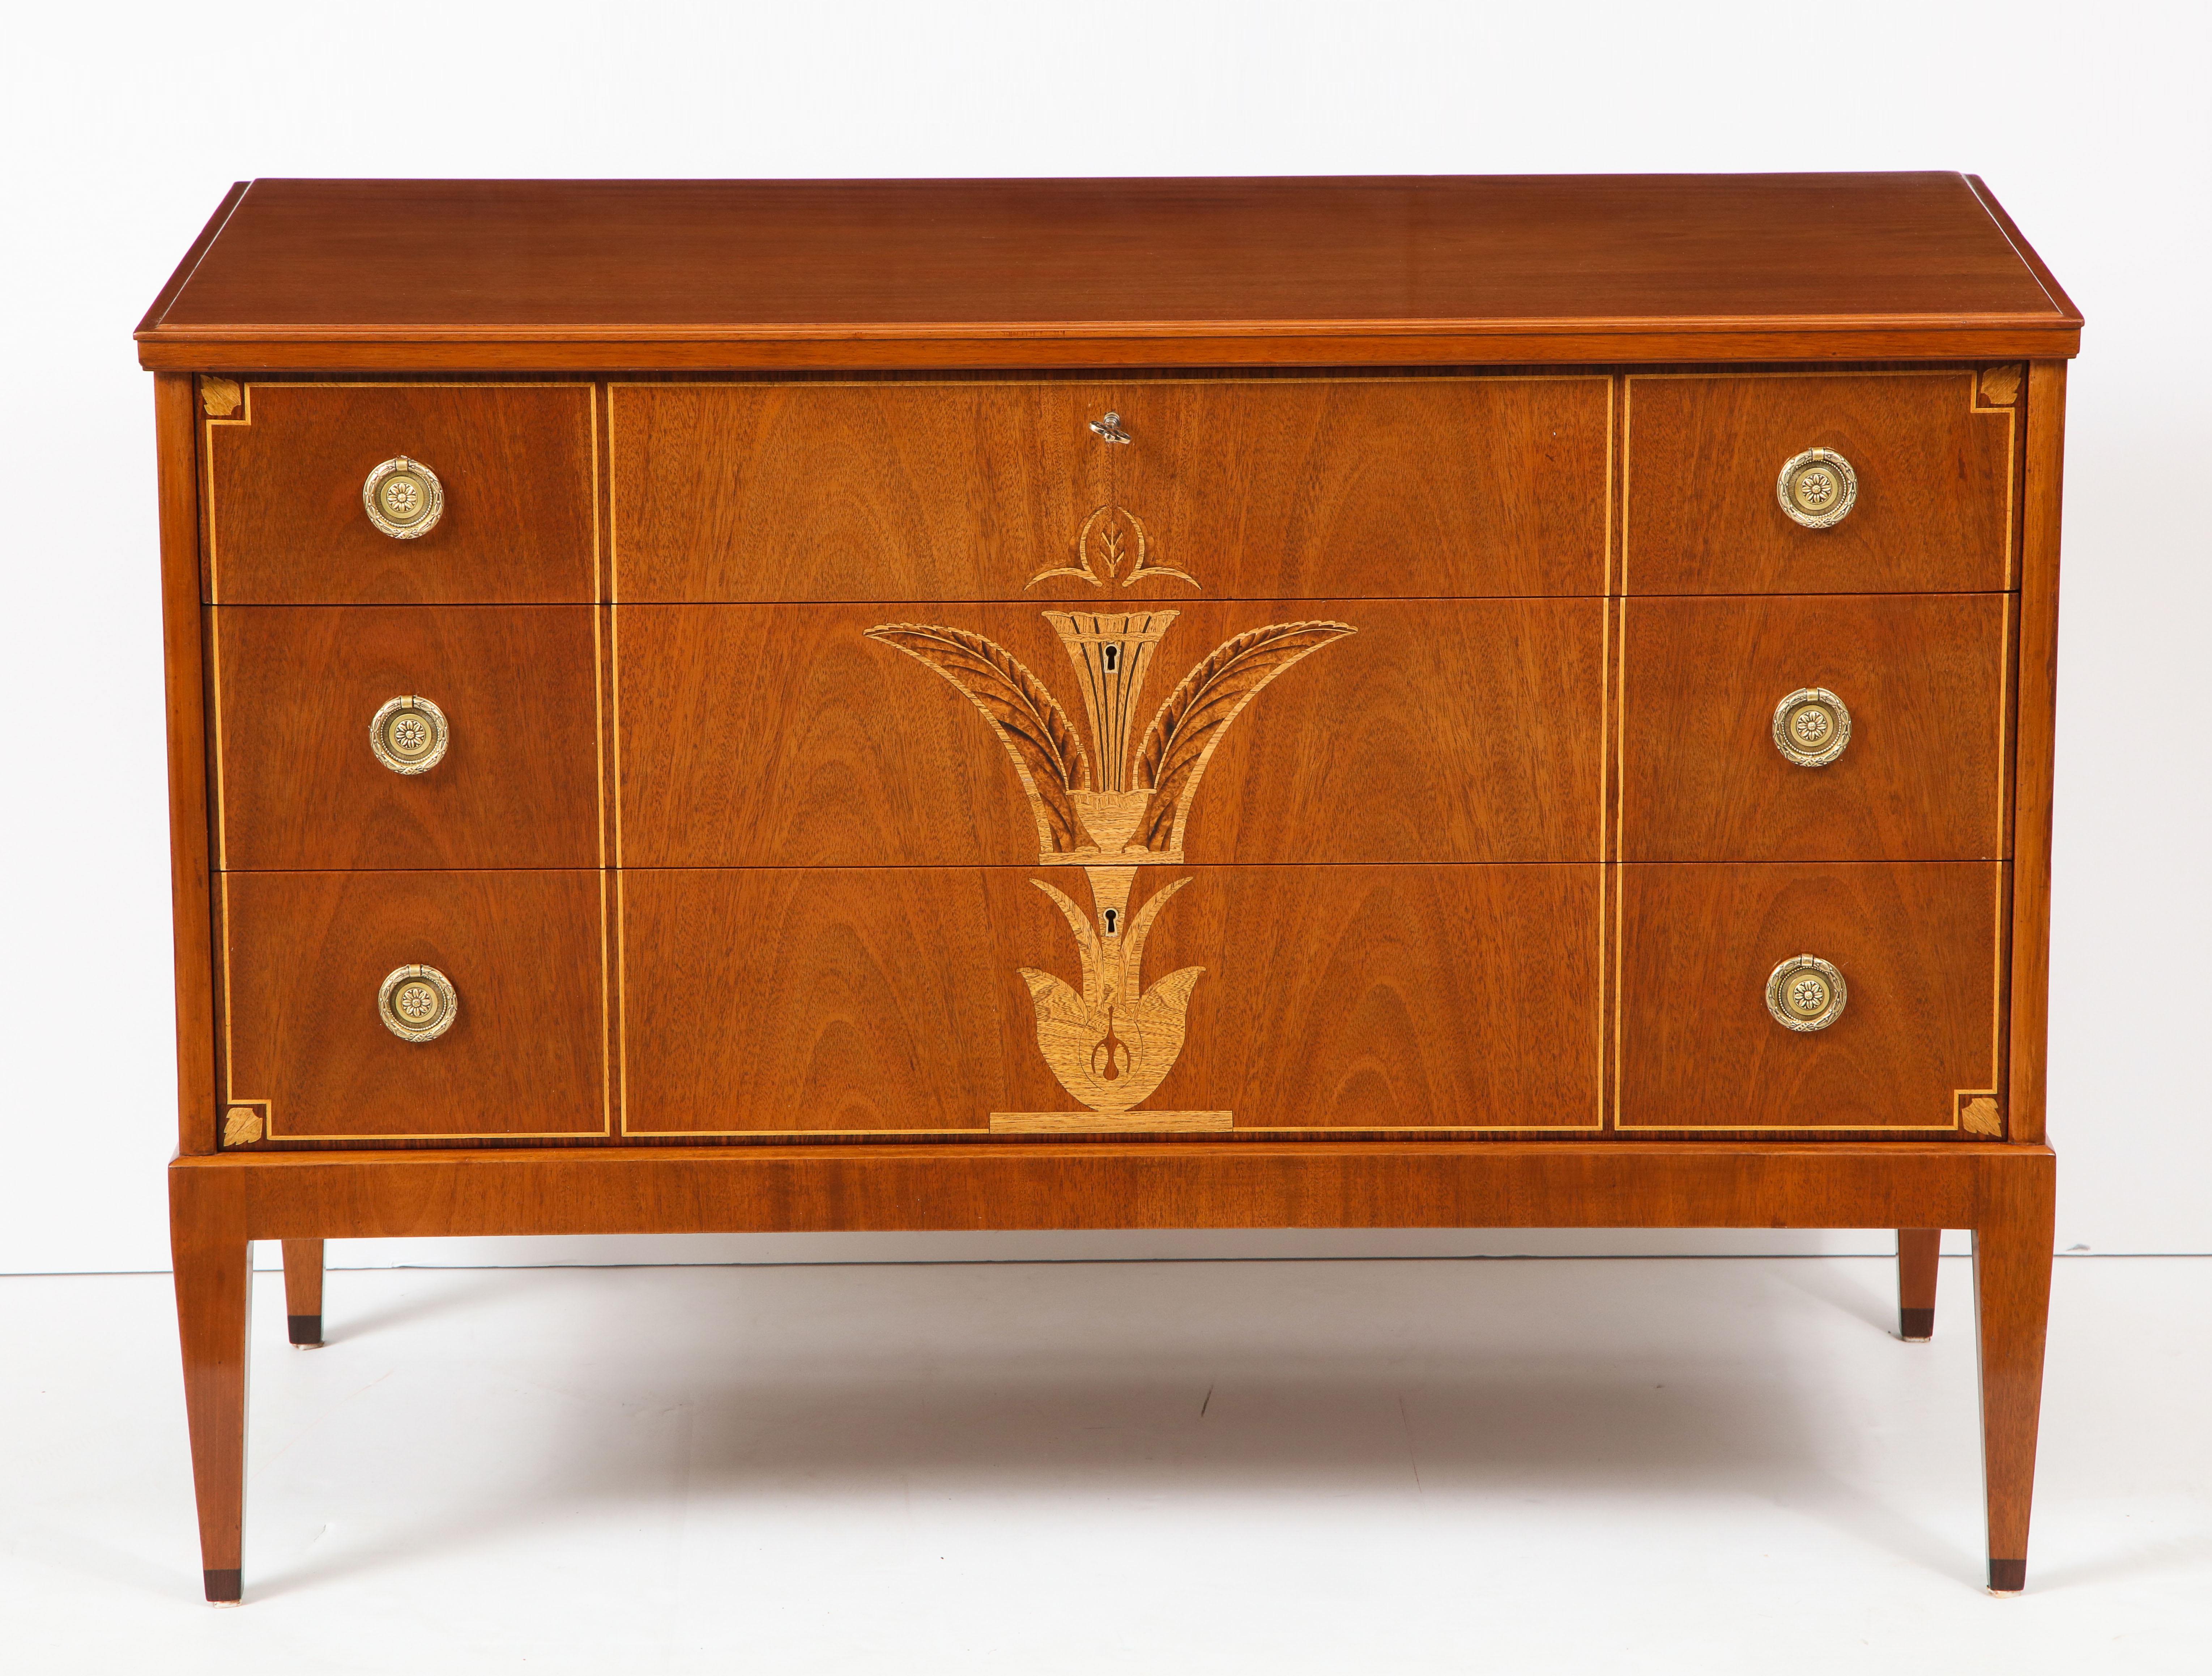 A Swedish Grace fruitwood & birchwood inlaid light mahogany commode, circa 1930s, for Nordiska Kompaniet, with a rectangular top above three flush fitting long drawers raised on square tapered legs. Metal retailers label on verso.